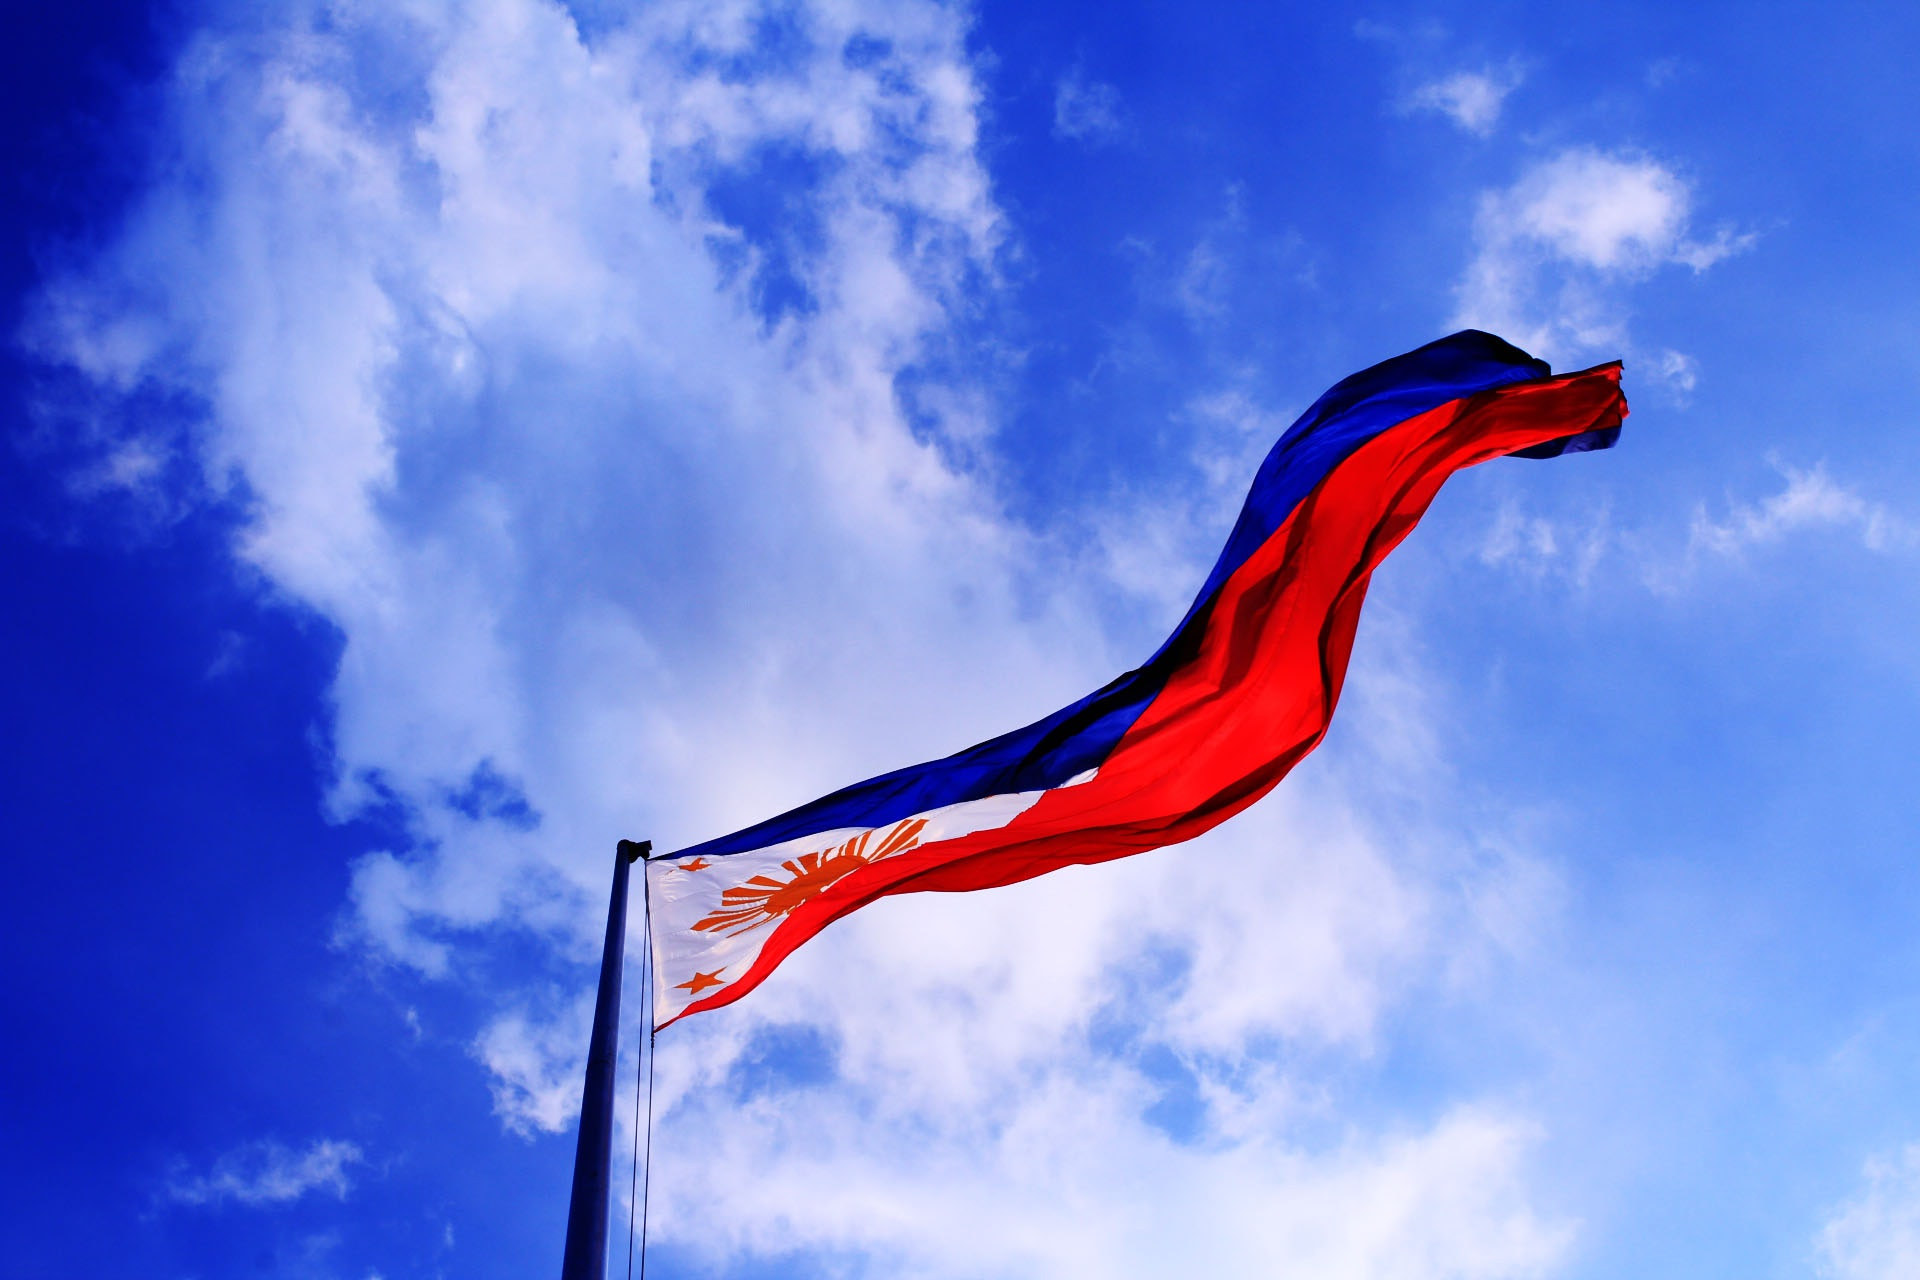 philippine independence day history, independence day trivia, ofw property investment, ofw investment